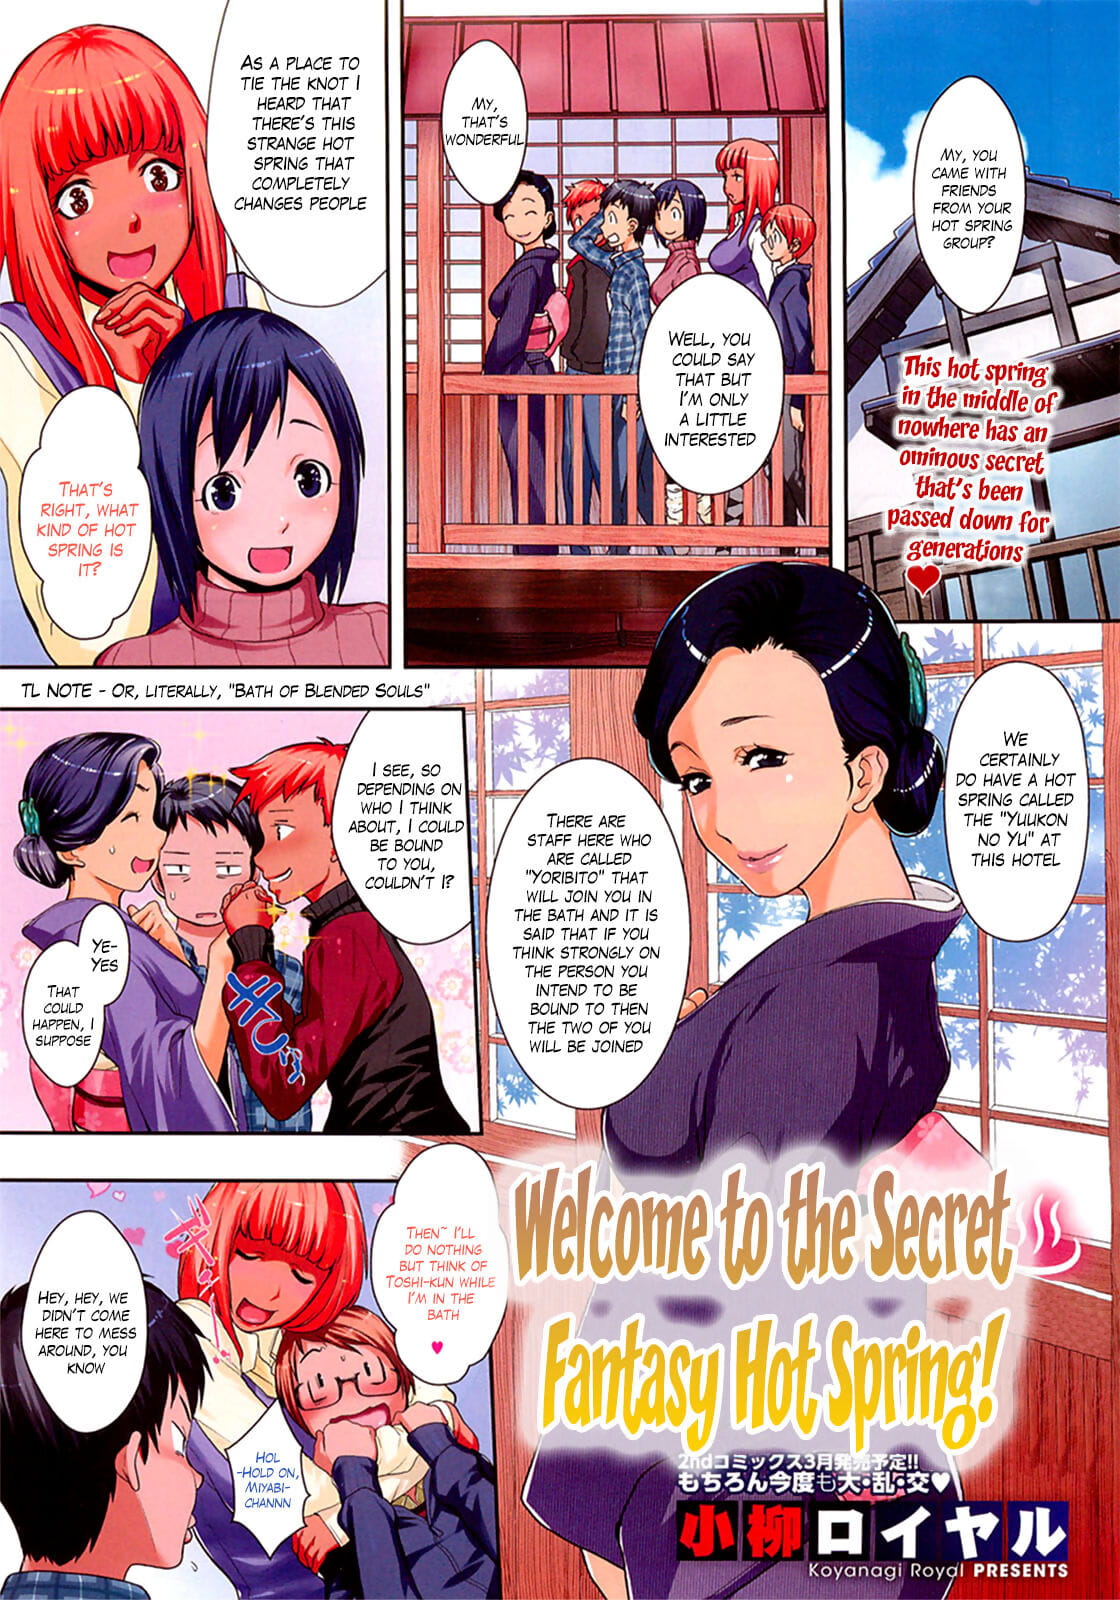 Mugen Hitou e Youkoso! - Welcome to the Secret Fantasy Hot Spring! page 1